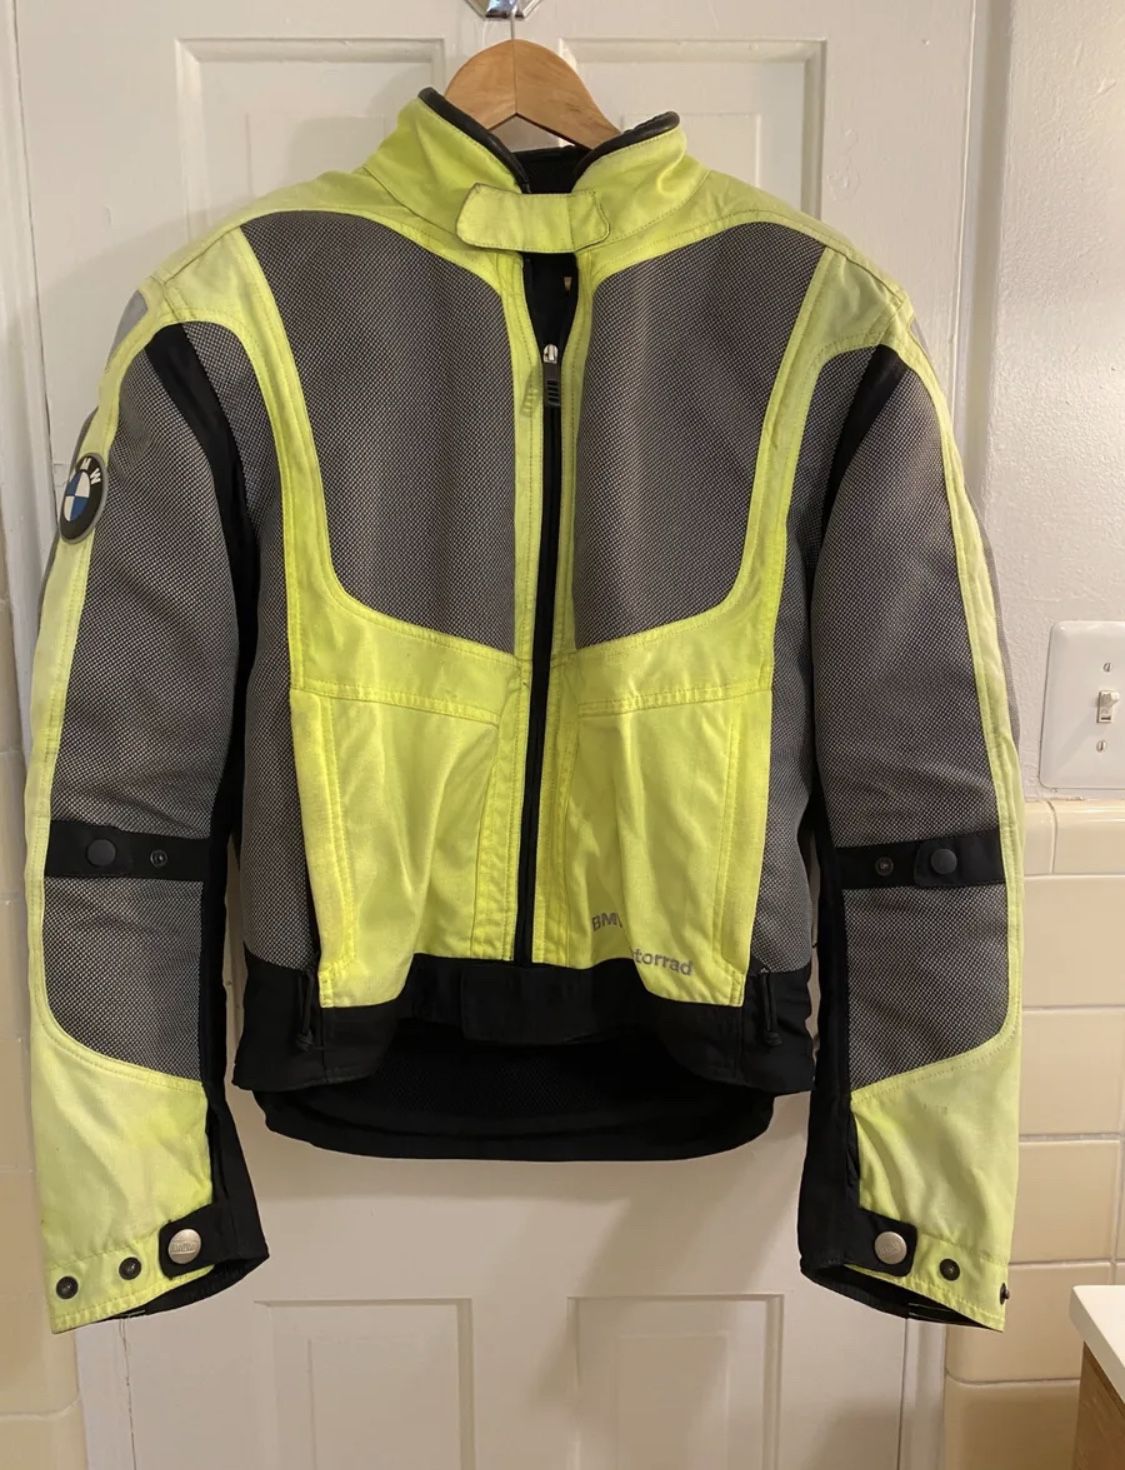 BMW Motorcycle Airshell jacket Male Size XXL 2XL for Sale in Tujunga ...